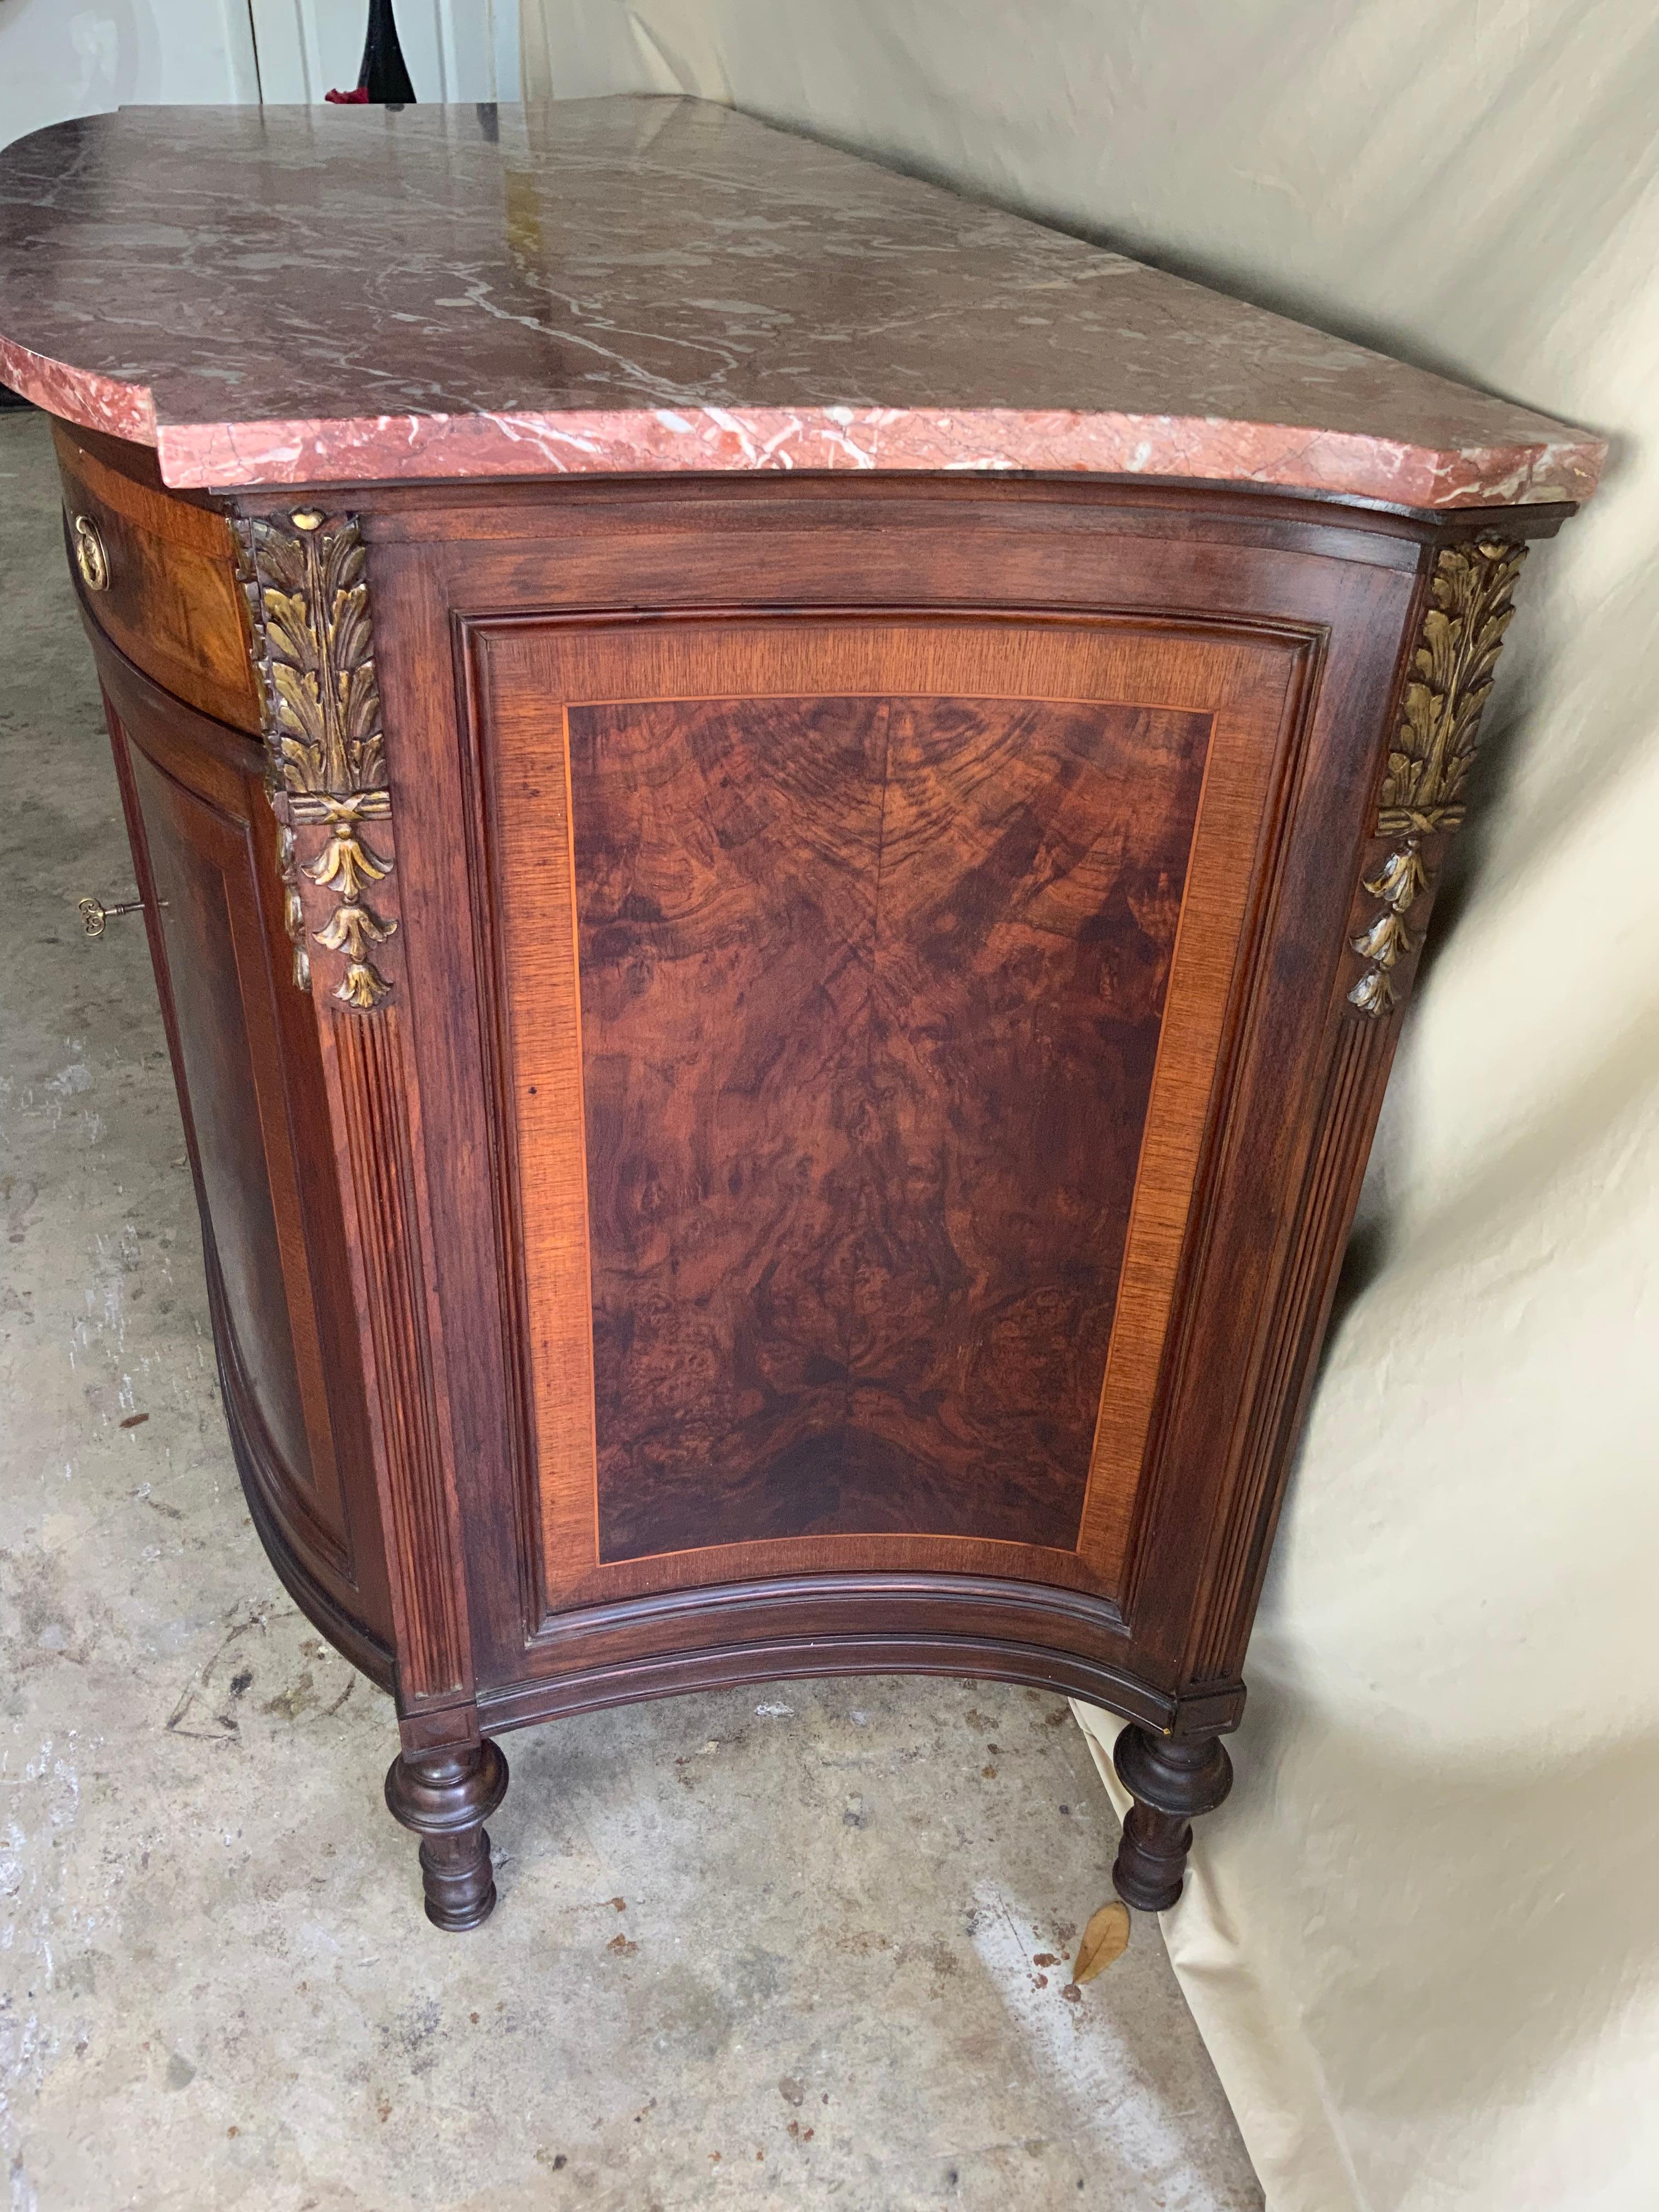 A very nice late 19th century French Marble Top Walnut Server or Linen Press. This is a beautiful piece with Pink Rouge marble and gilt leaf carvings on the concave and rear corners of the case. Nicely decorated burl Walnut case with inlays and